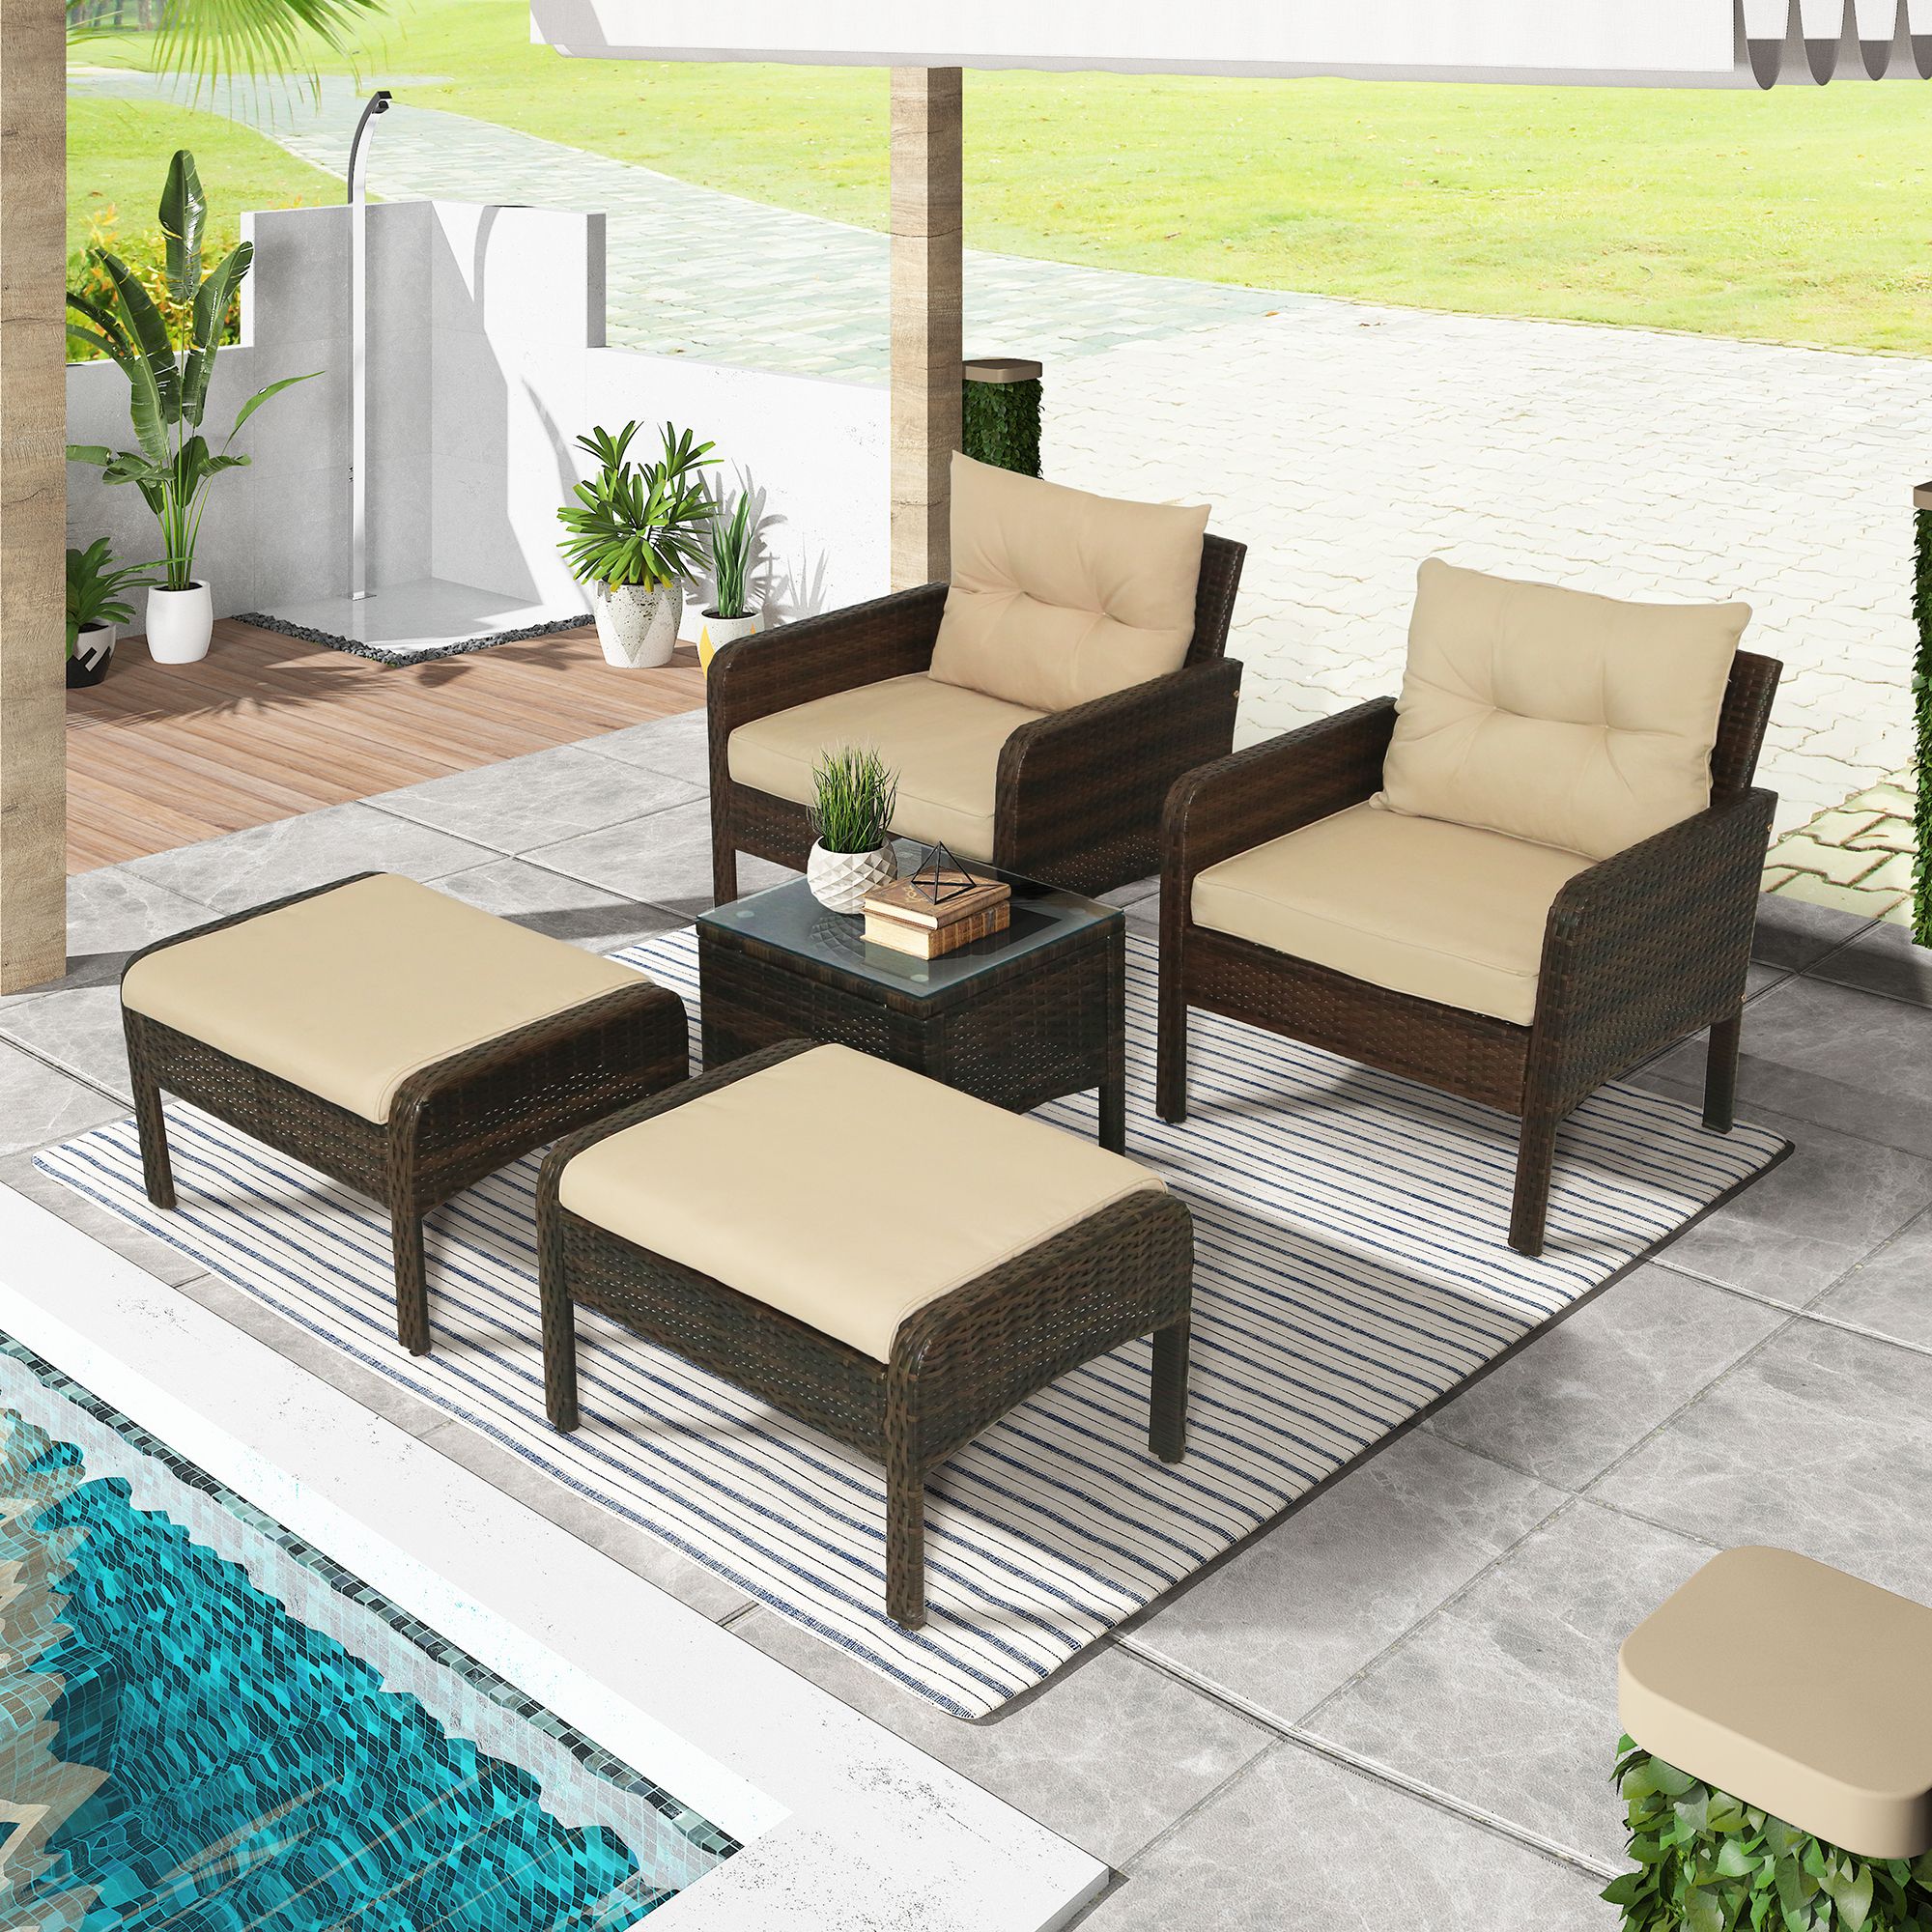 5 Piece Patio Wicker Sofa Set, Outdoor Furniture Set With 2pcs Arm Throughout Favorite Natural Woven Outdoor Chairs Sets (View 3 of 15)